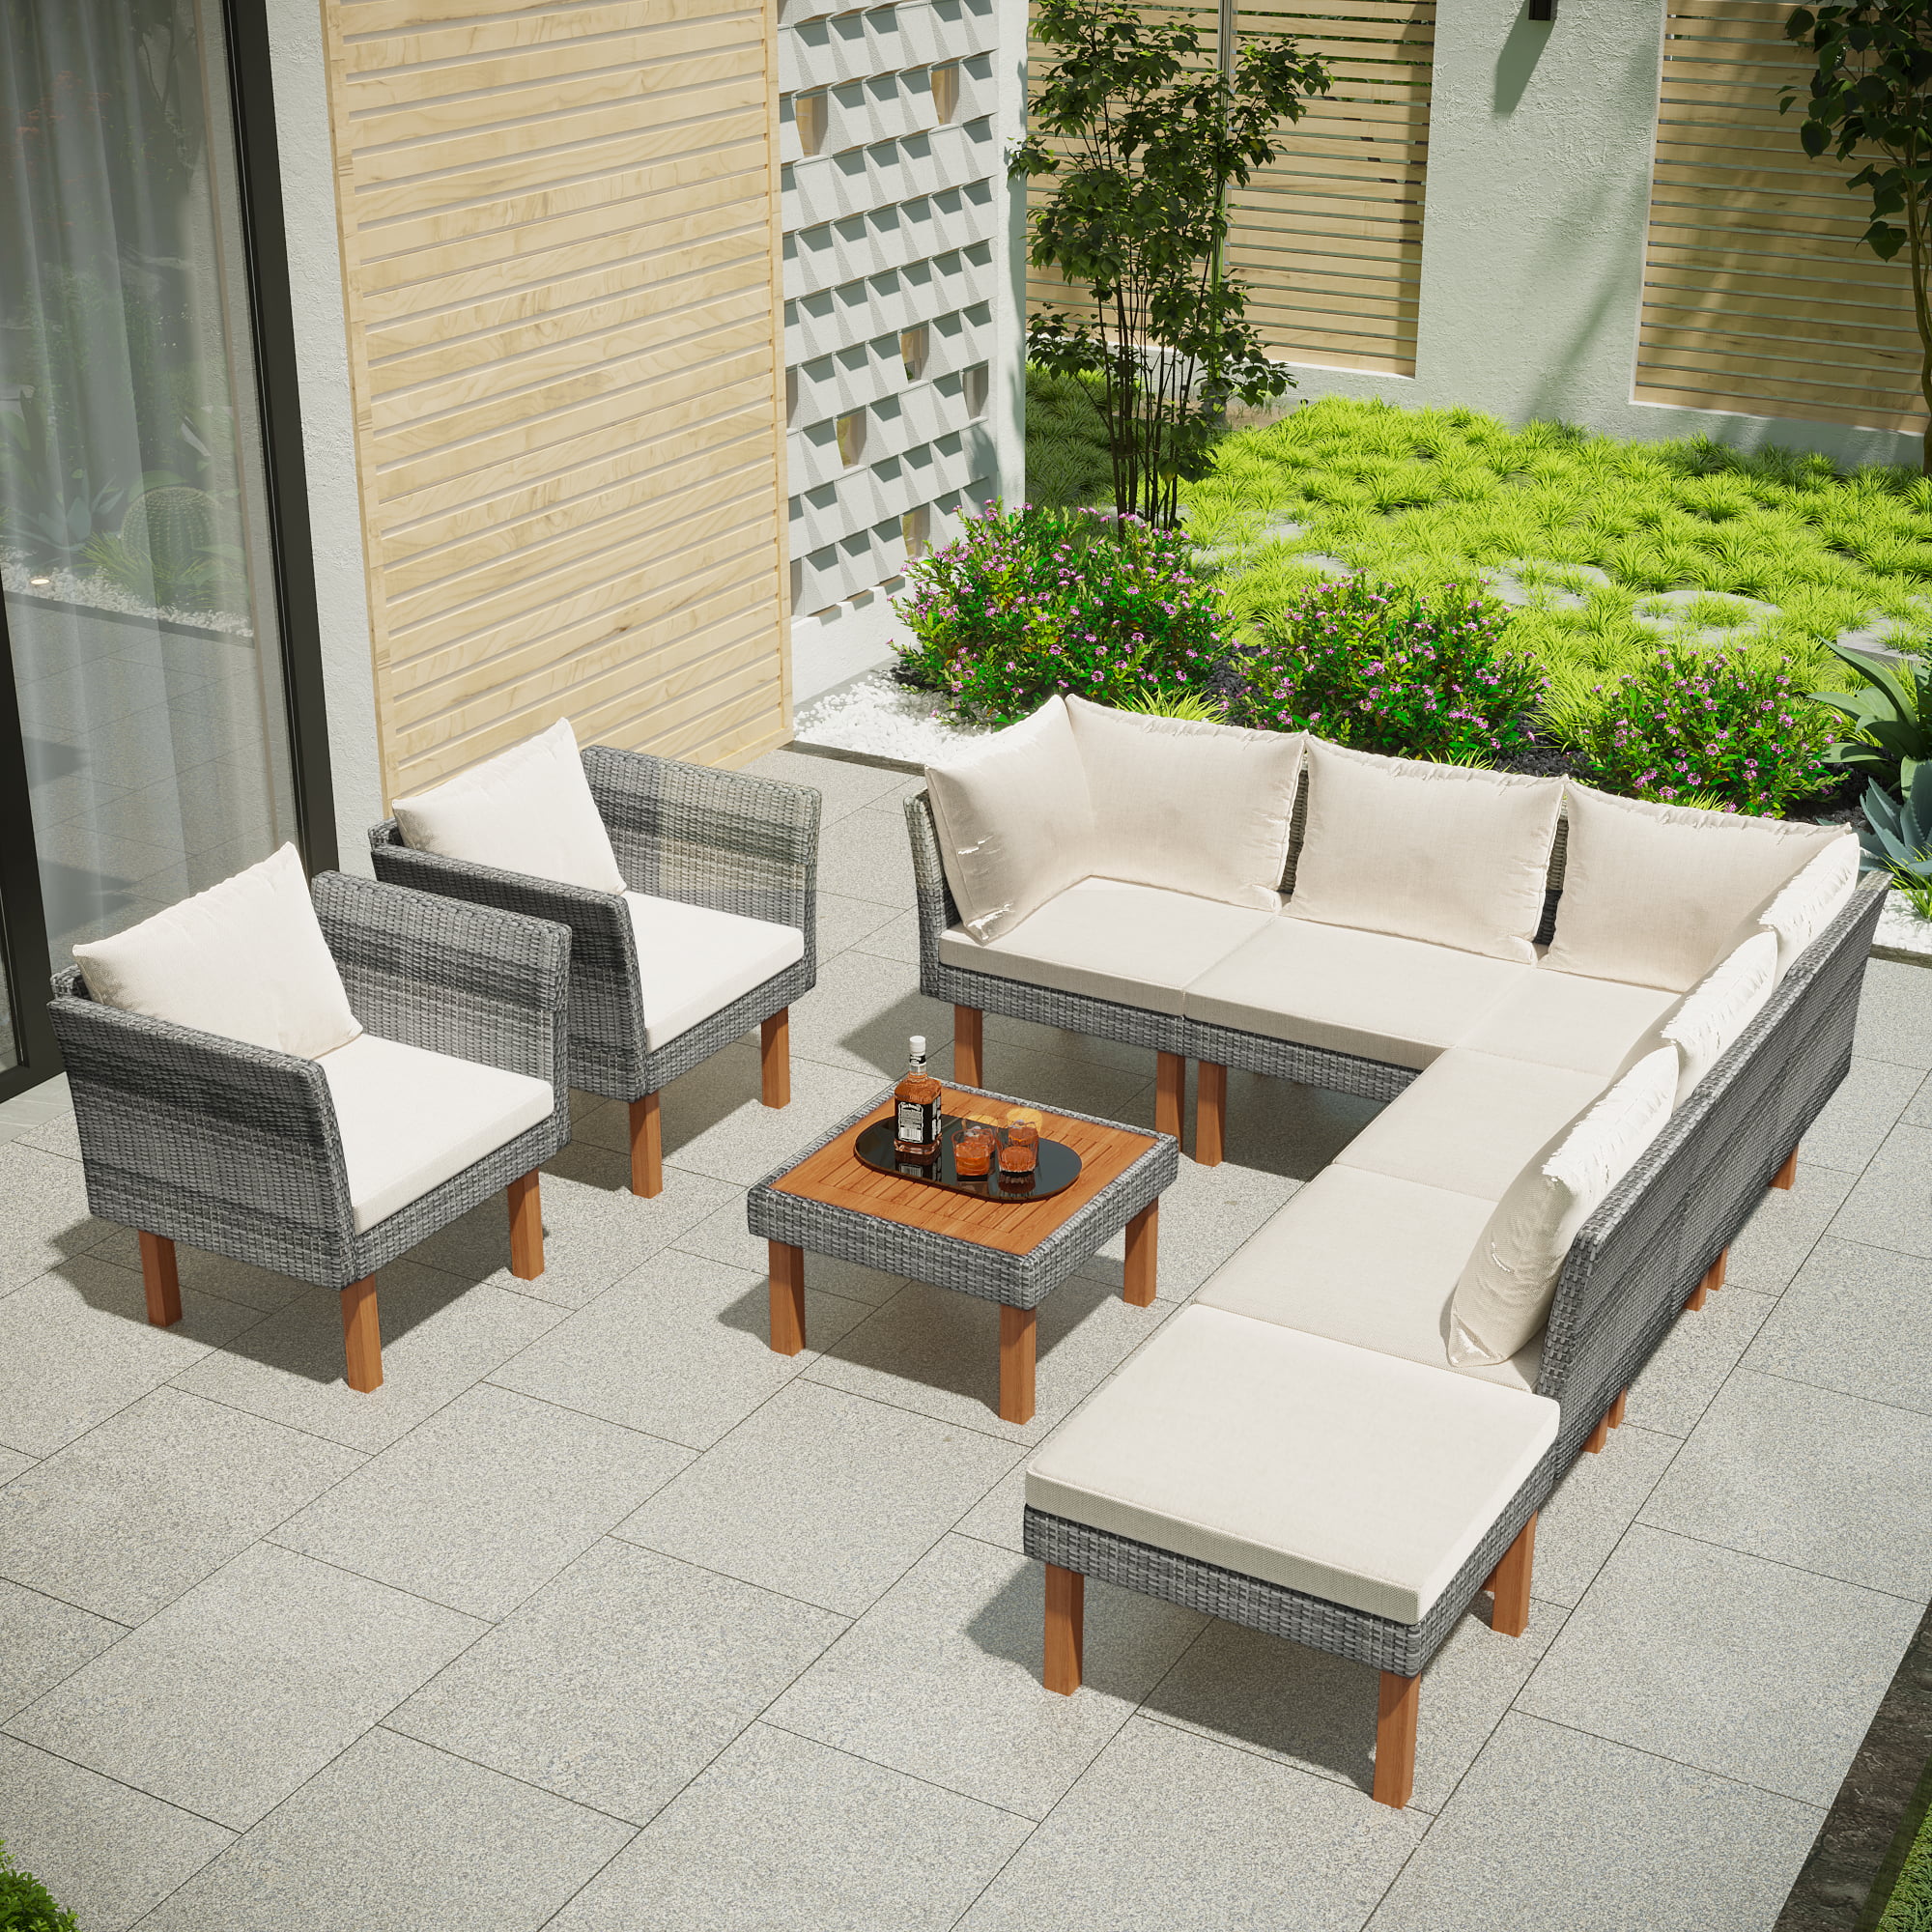 Abanopi 9-Piece Outdoor Patio Garden Wicker Sofa Set, Gray PE Rattan Sofa Set, with Wood Legs, Acacia Wood Tabletop, Armrest Chairs with Beige Cushions - image 3 of 7